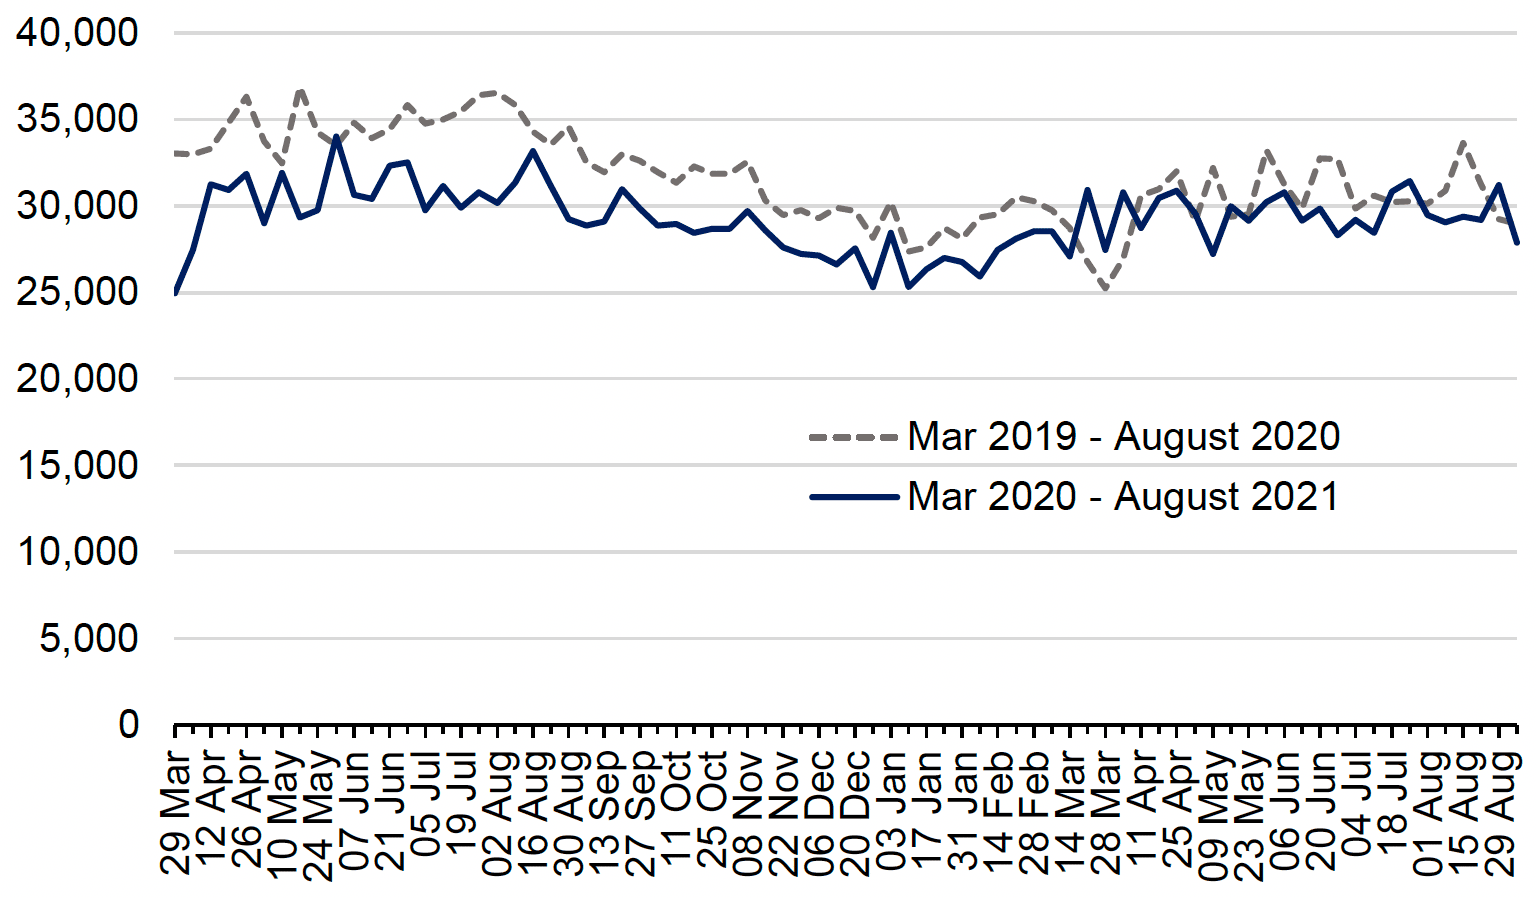 Line graph showing incidents recorded by Police Scotland in March 2019-August 2020, compared to March 2020-August 2021.